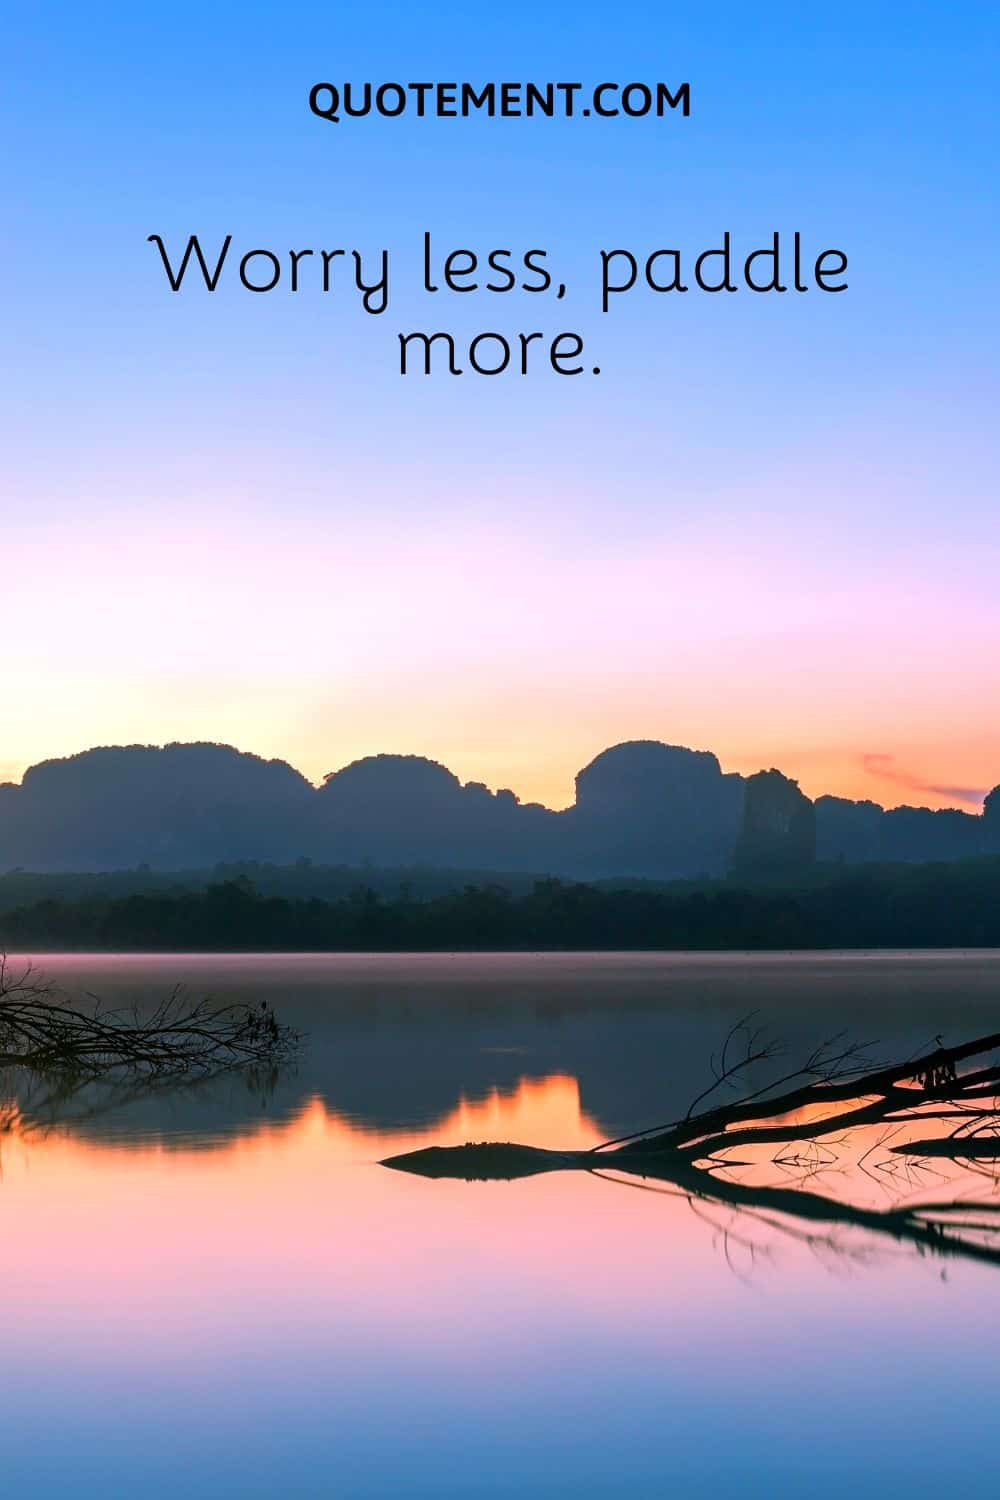 Worry less, paddle more.